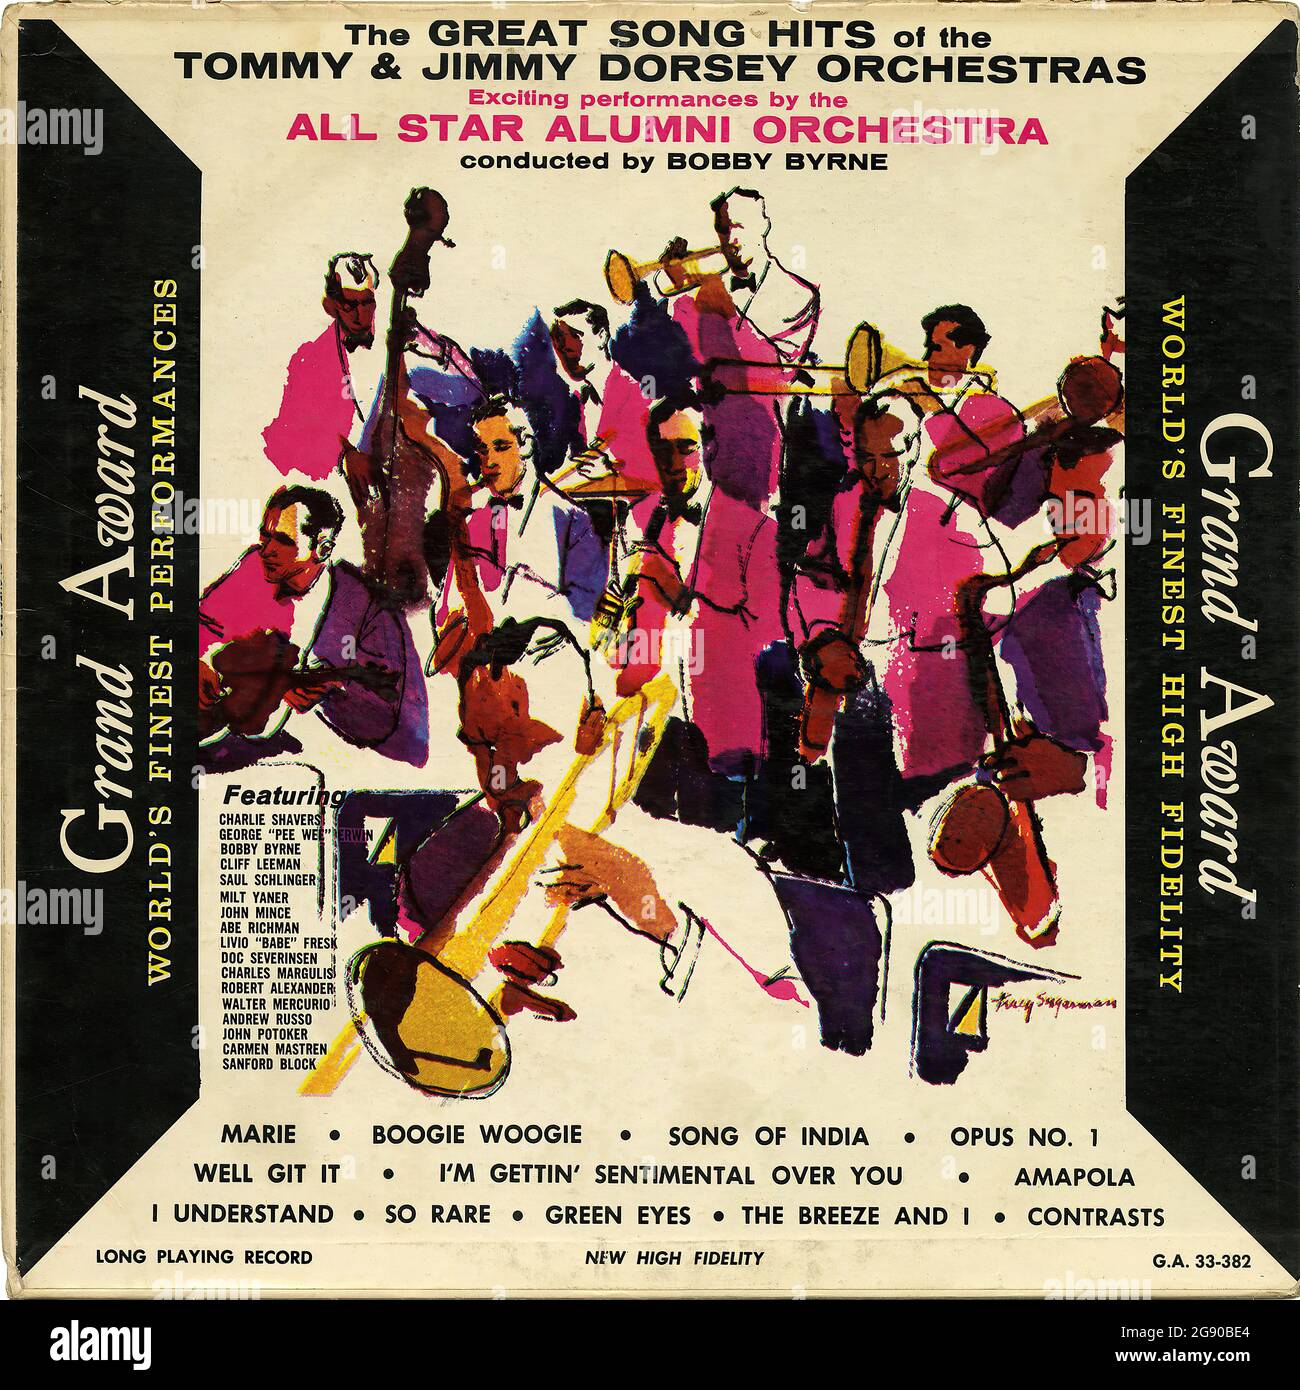 The Great Songs Hits of the Tommy & Jimmy Dorsey Orchestras - Vintage Vinyl Schallplattencover Stockfoto